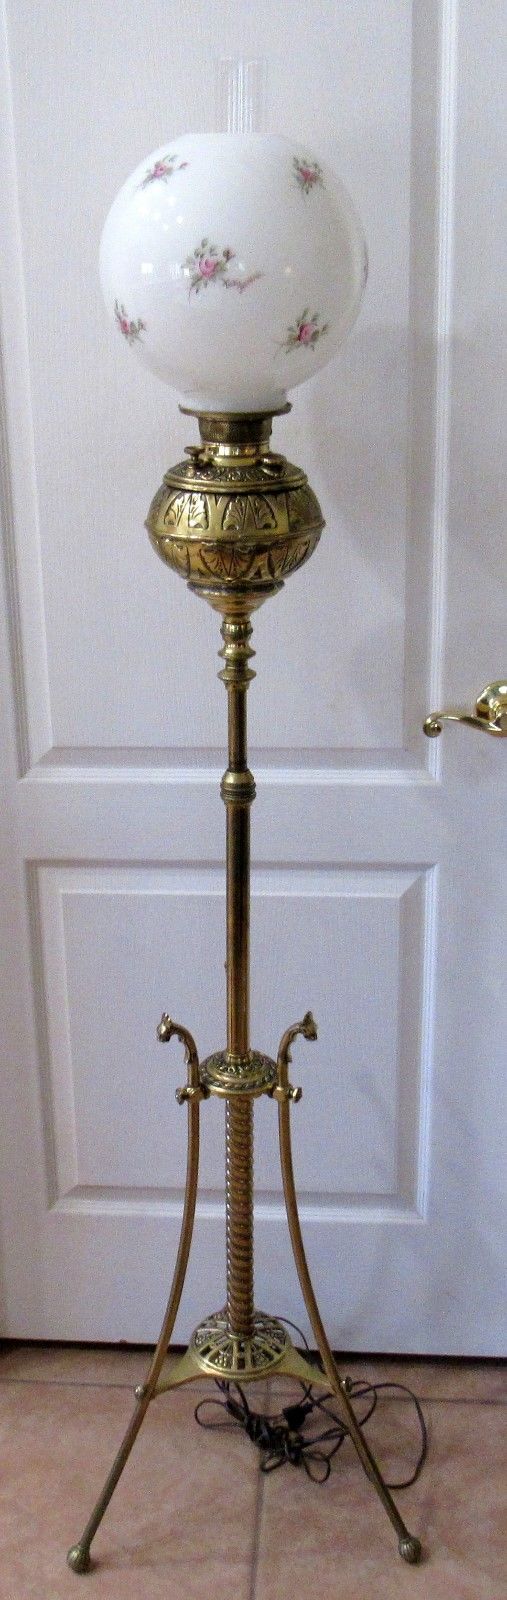 Antique Brass Piano/Organ Floor Lamp Dated June 18 1878 Glass Shade Electric